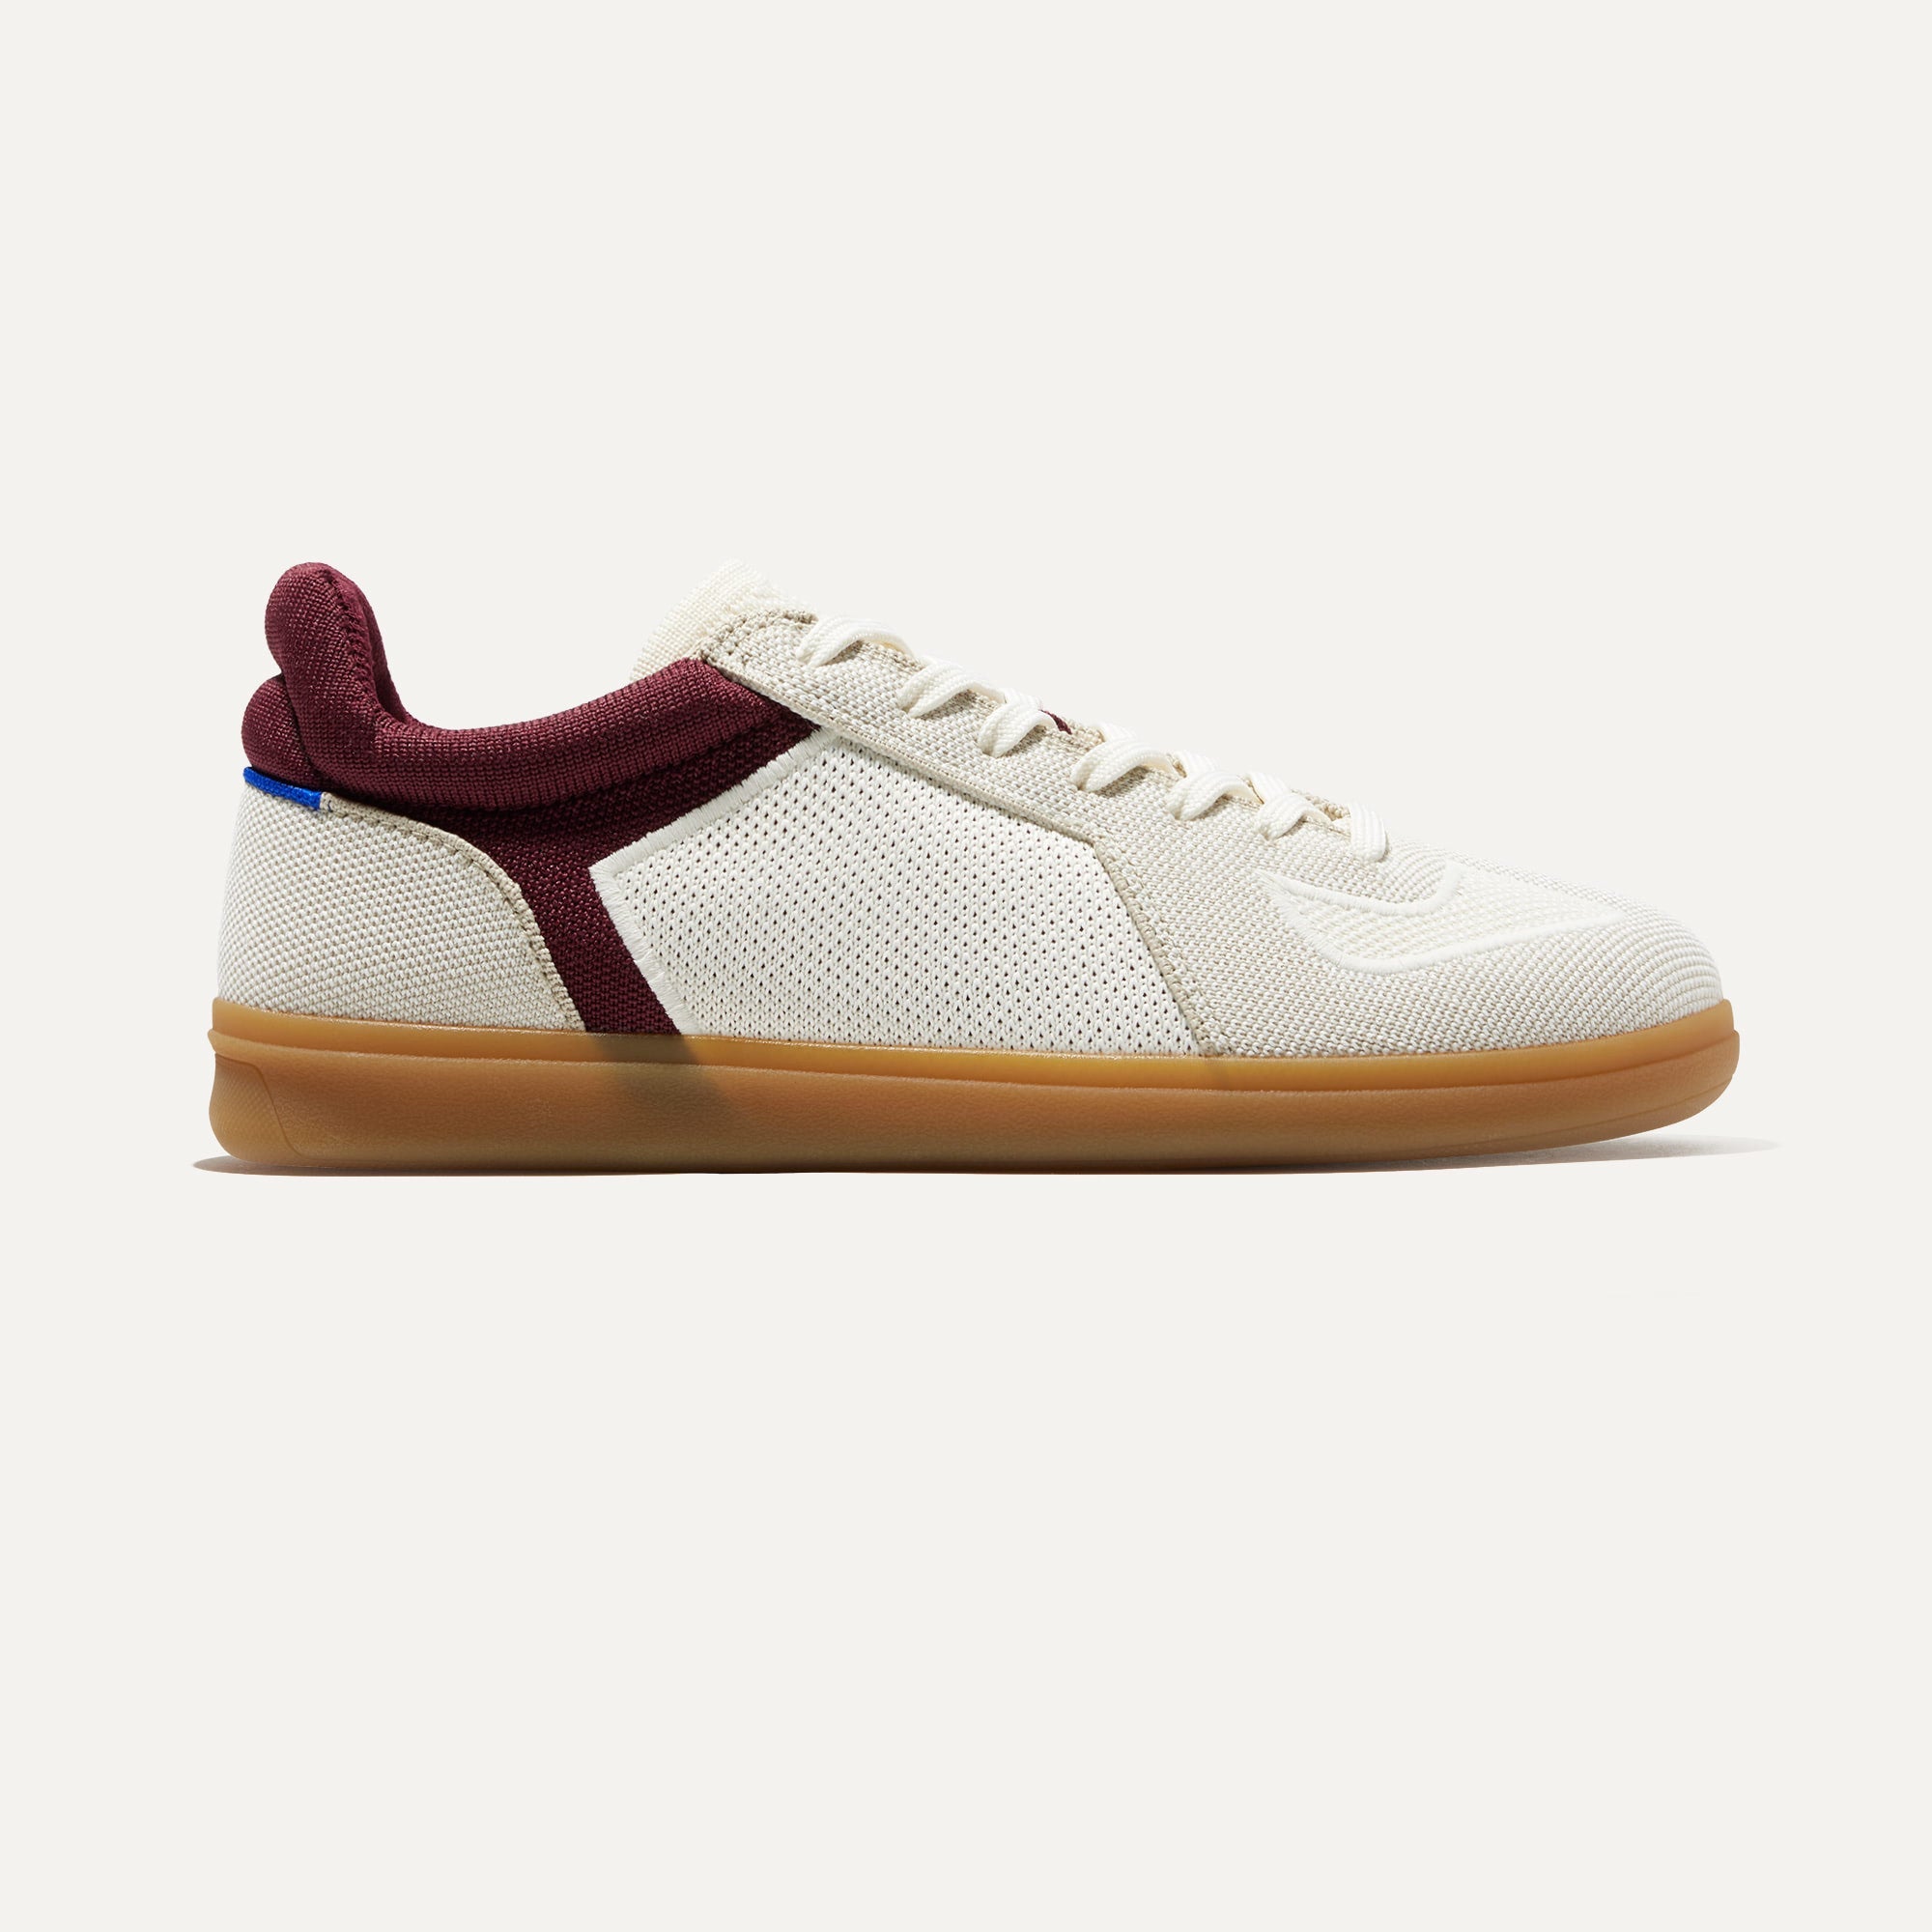 The RS01 Sneaker in Maroon | Men's Shoes | Rothy's